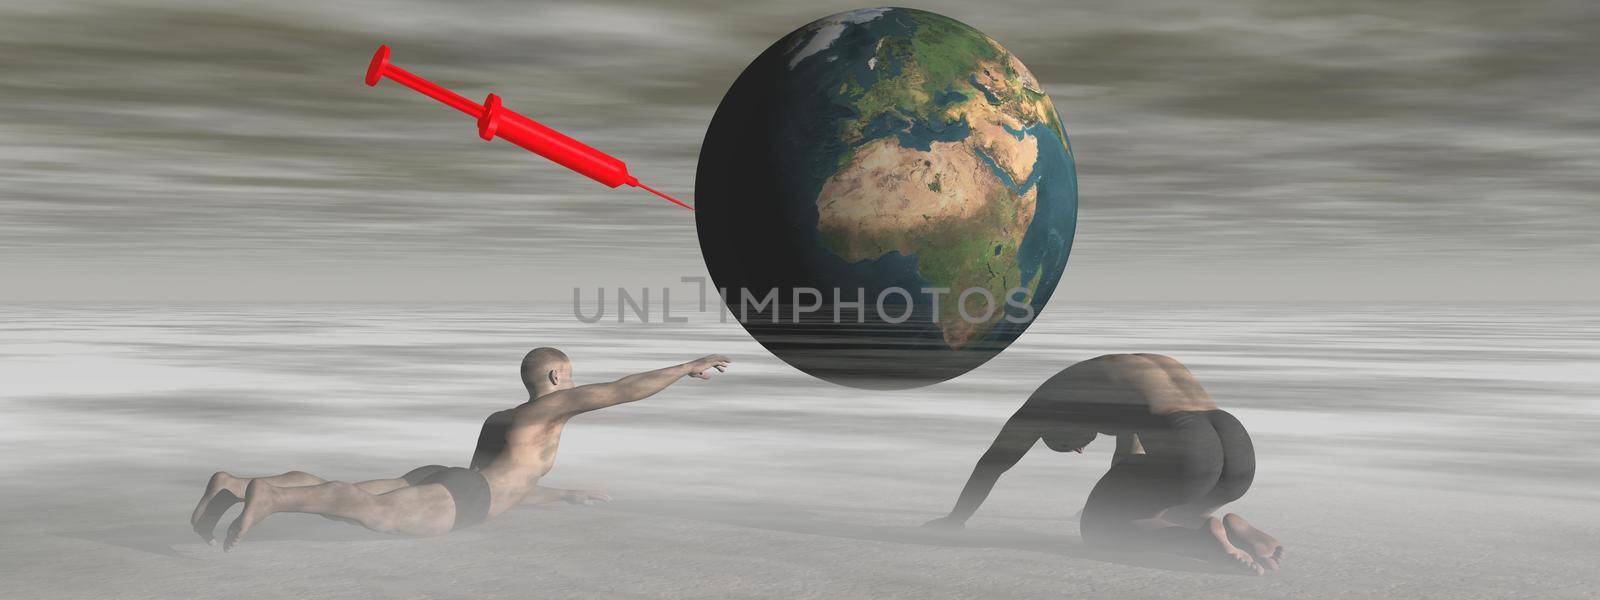 The human kills the blue planet - 3d rendering